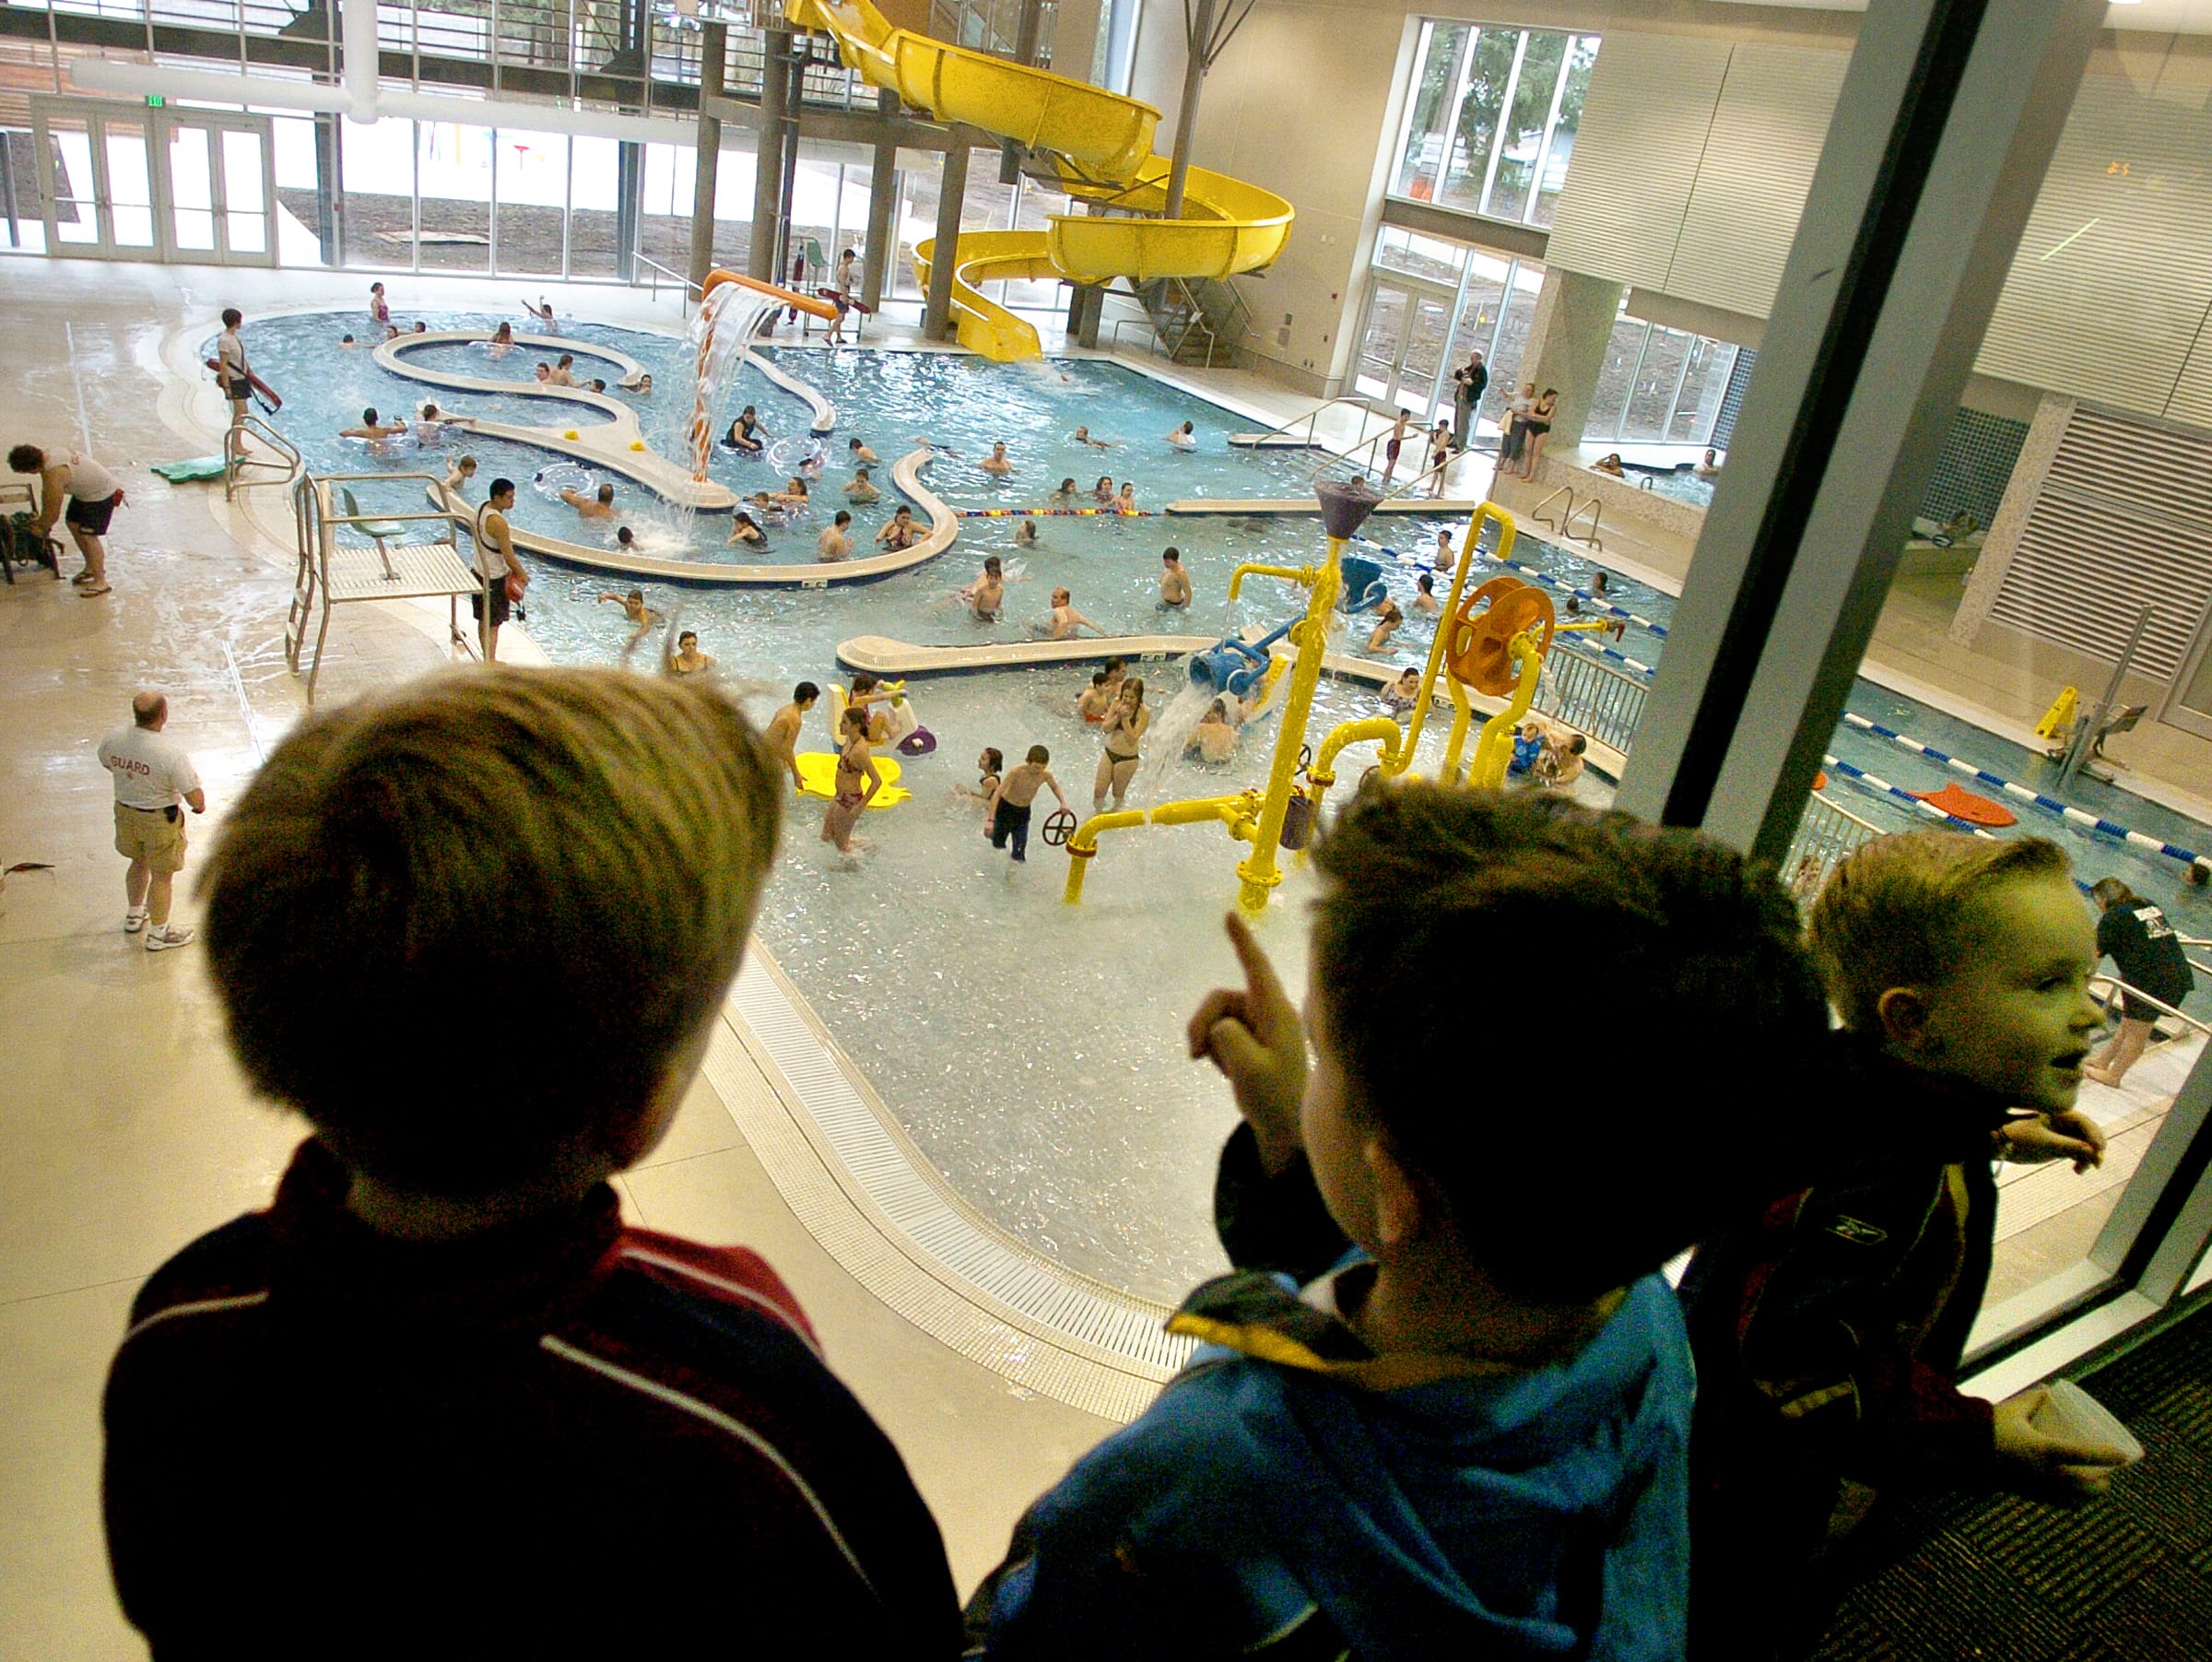 Dillon Gohl of Camas, 7, from left, and his brothers Tanner Gohl, 6, and Austin Gohl, 4, look down at the  Firstenburg Community Center pool on Feb. 26, 2006, the day of the center's grand opening dedication.